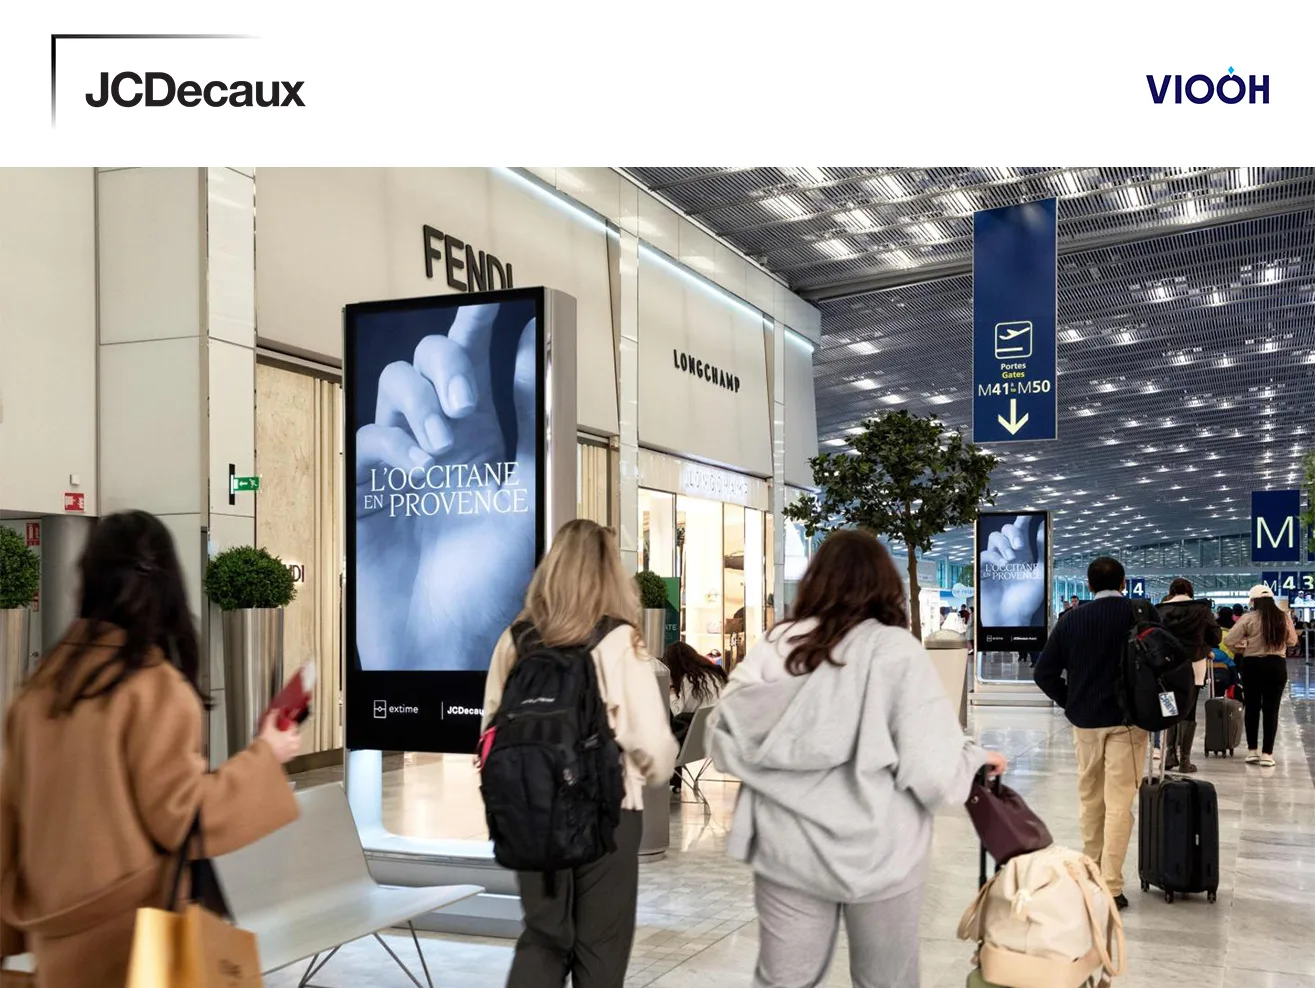 jcdecaux launches world's first global airport programmatic dooh advertising solution